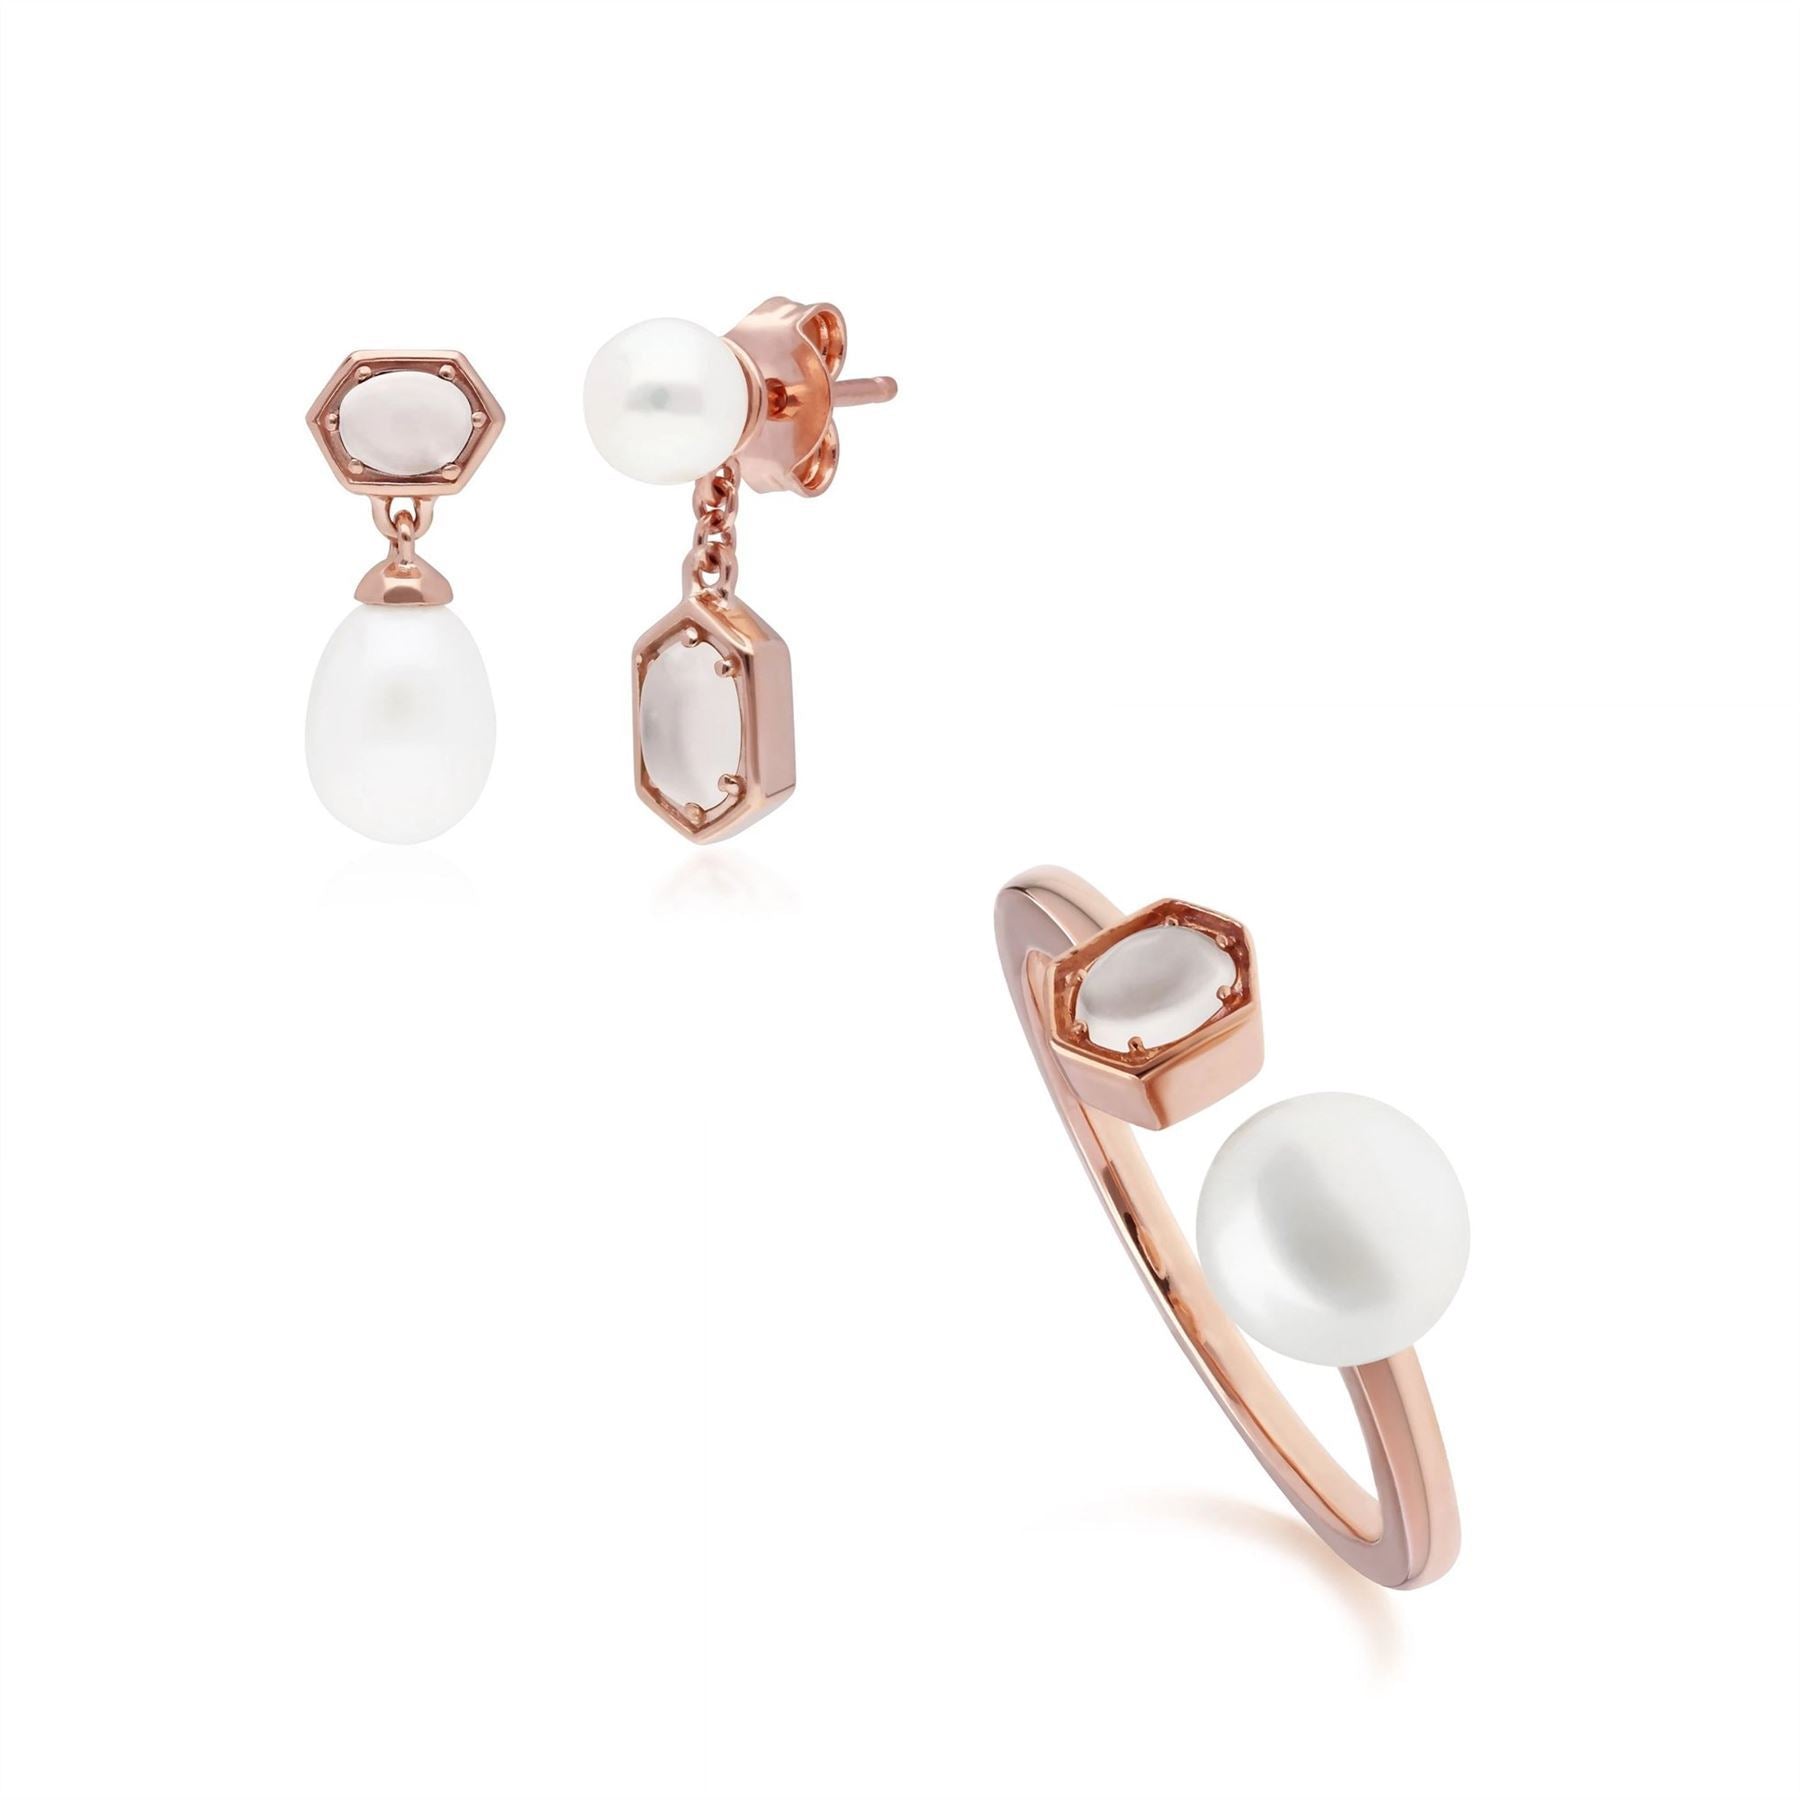 Modern Pearl & Moonstone Earring & Ring Set in Rose Gold Plated Sterling Silver